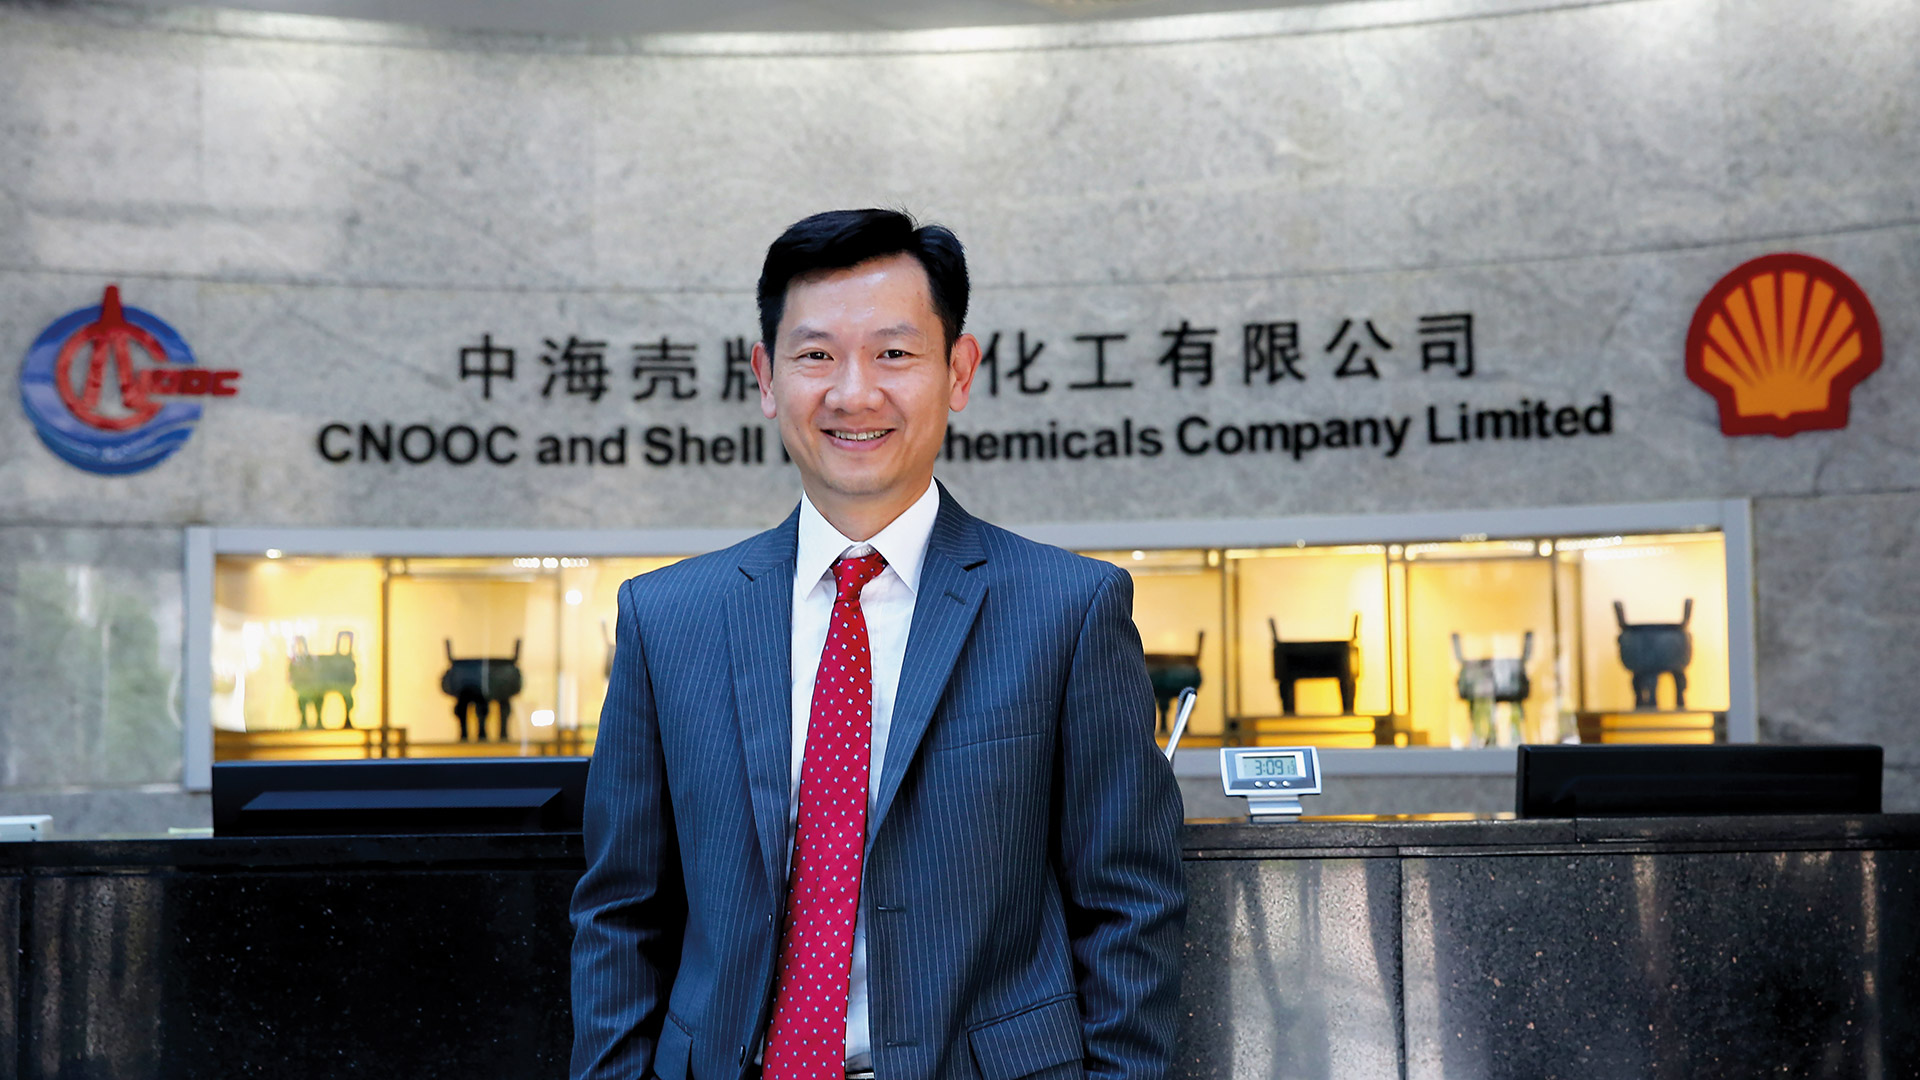 Patrick Tai, Finance Director, CNOOC and Shell Petrochemicals Company Limited